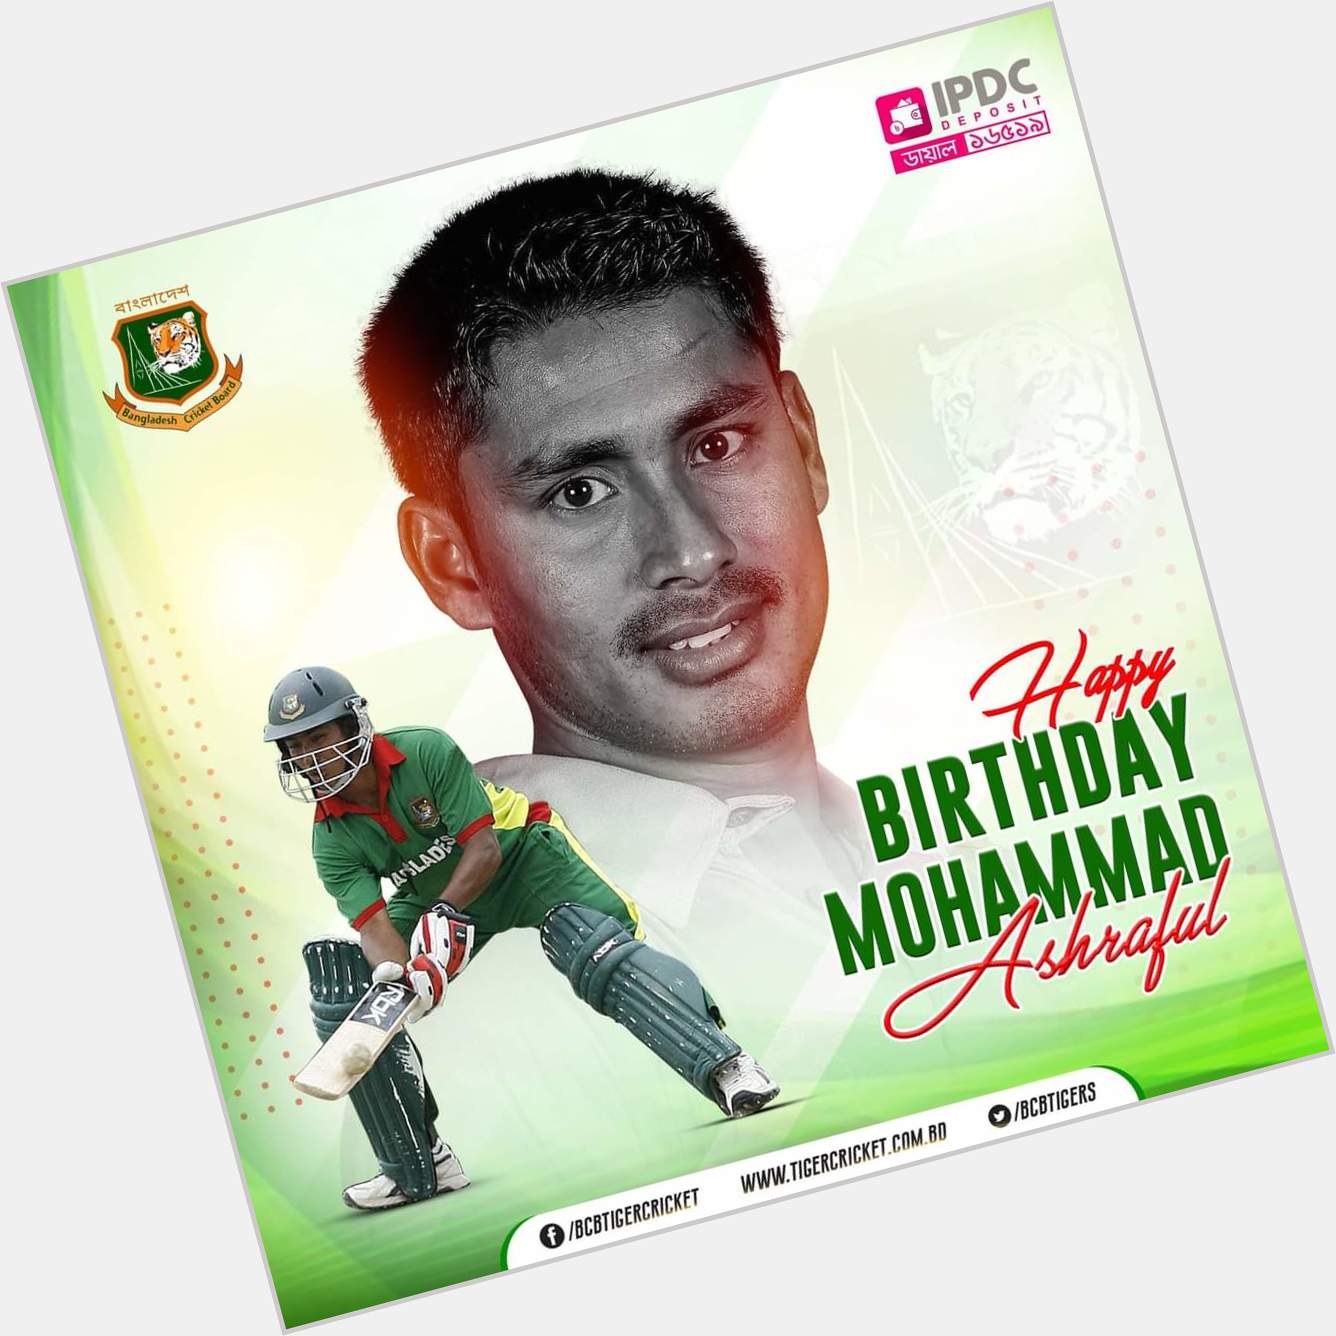 Happy 37th birthday Mohammad Ashraful. Best wishes for the years ahead 